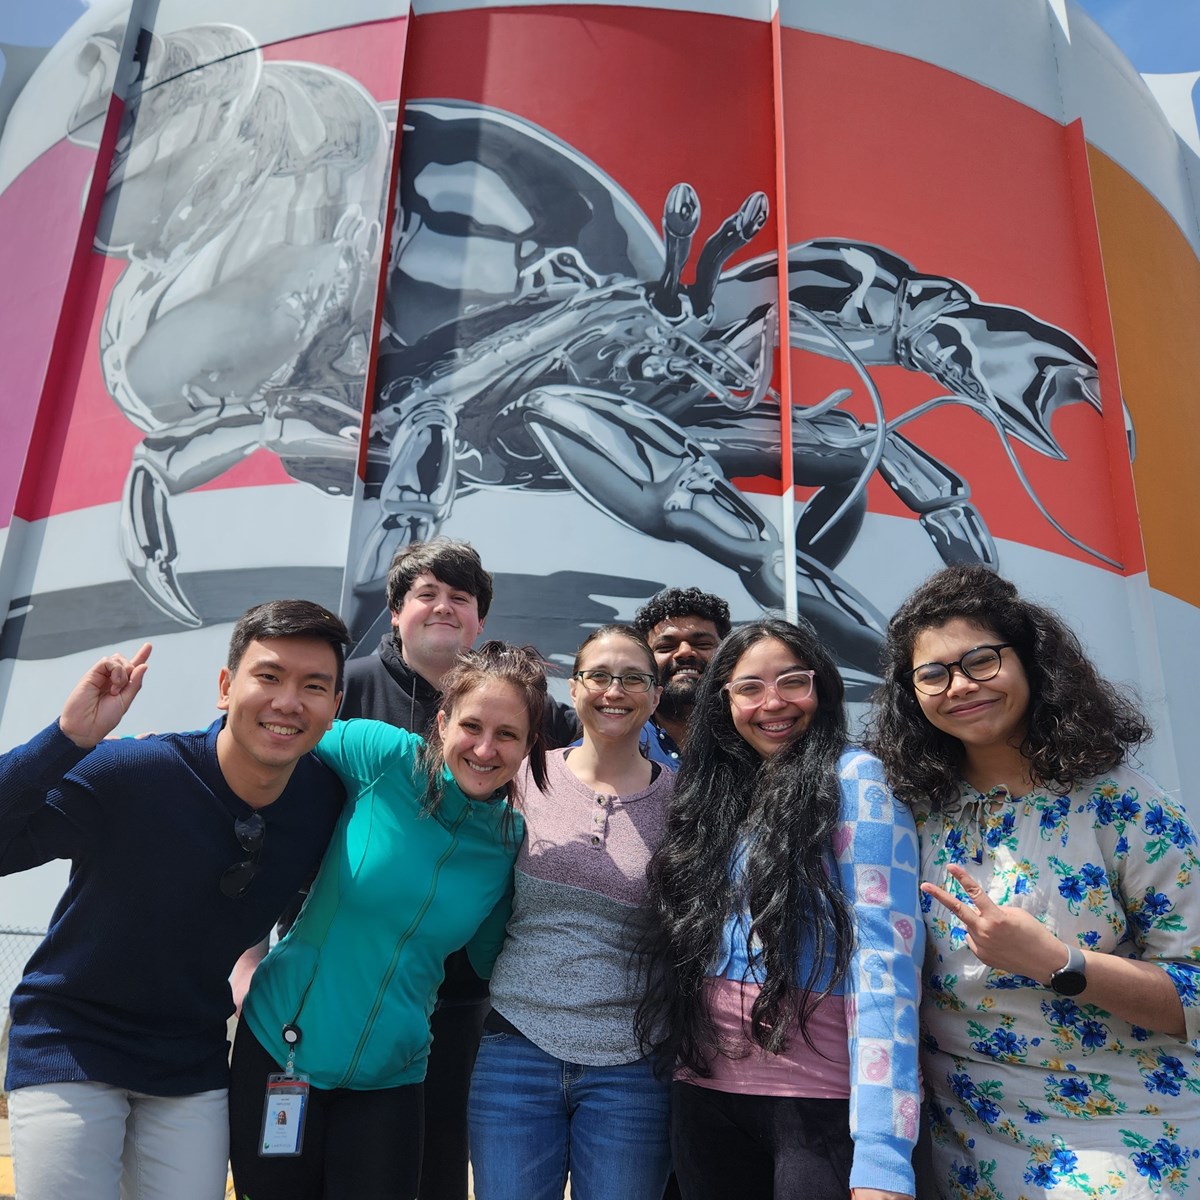 Nuclear Forensics students in a group, in front of the reactor containment building.  The building has an artistic rendition of a hermit crab with rainbow colors all around the perimeter